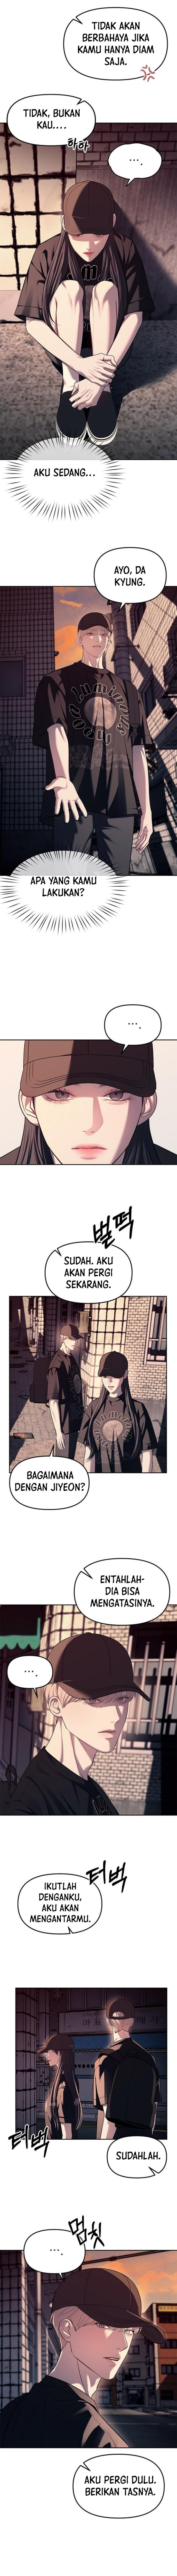 Undercover! Chaebol High School Chapter 36